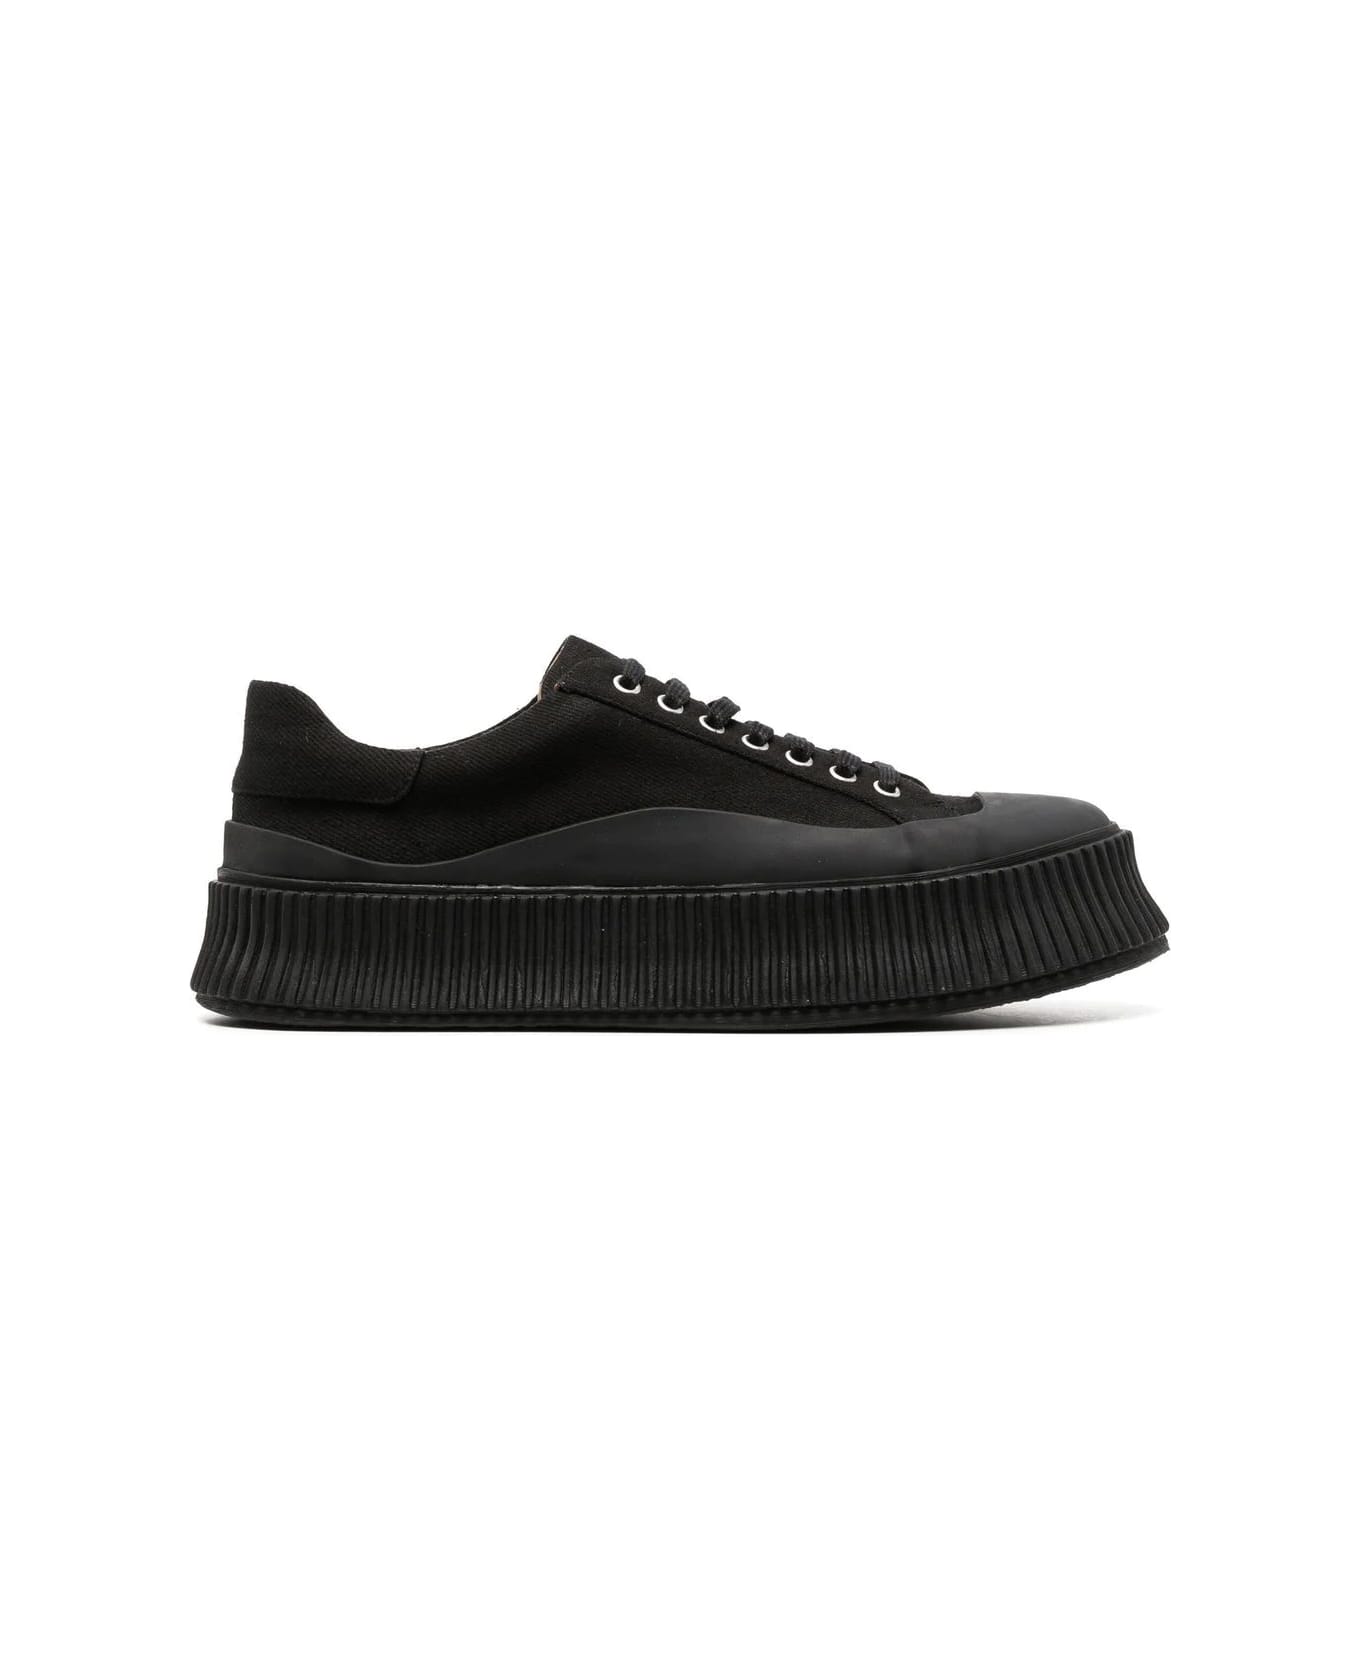 Jil Sander Low Laced Sneakers With Vulcanized Rubber Sole - Black スニーカー